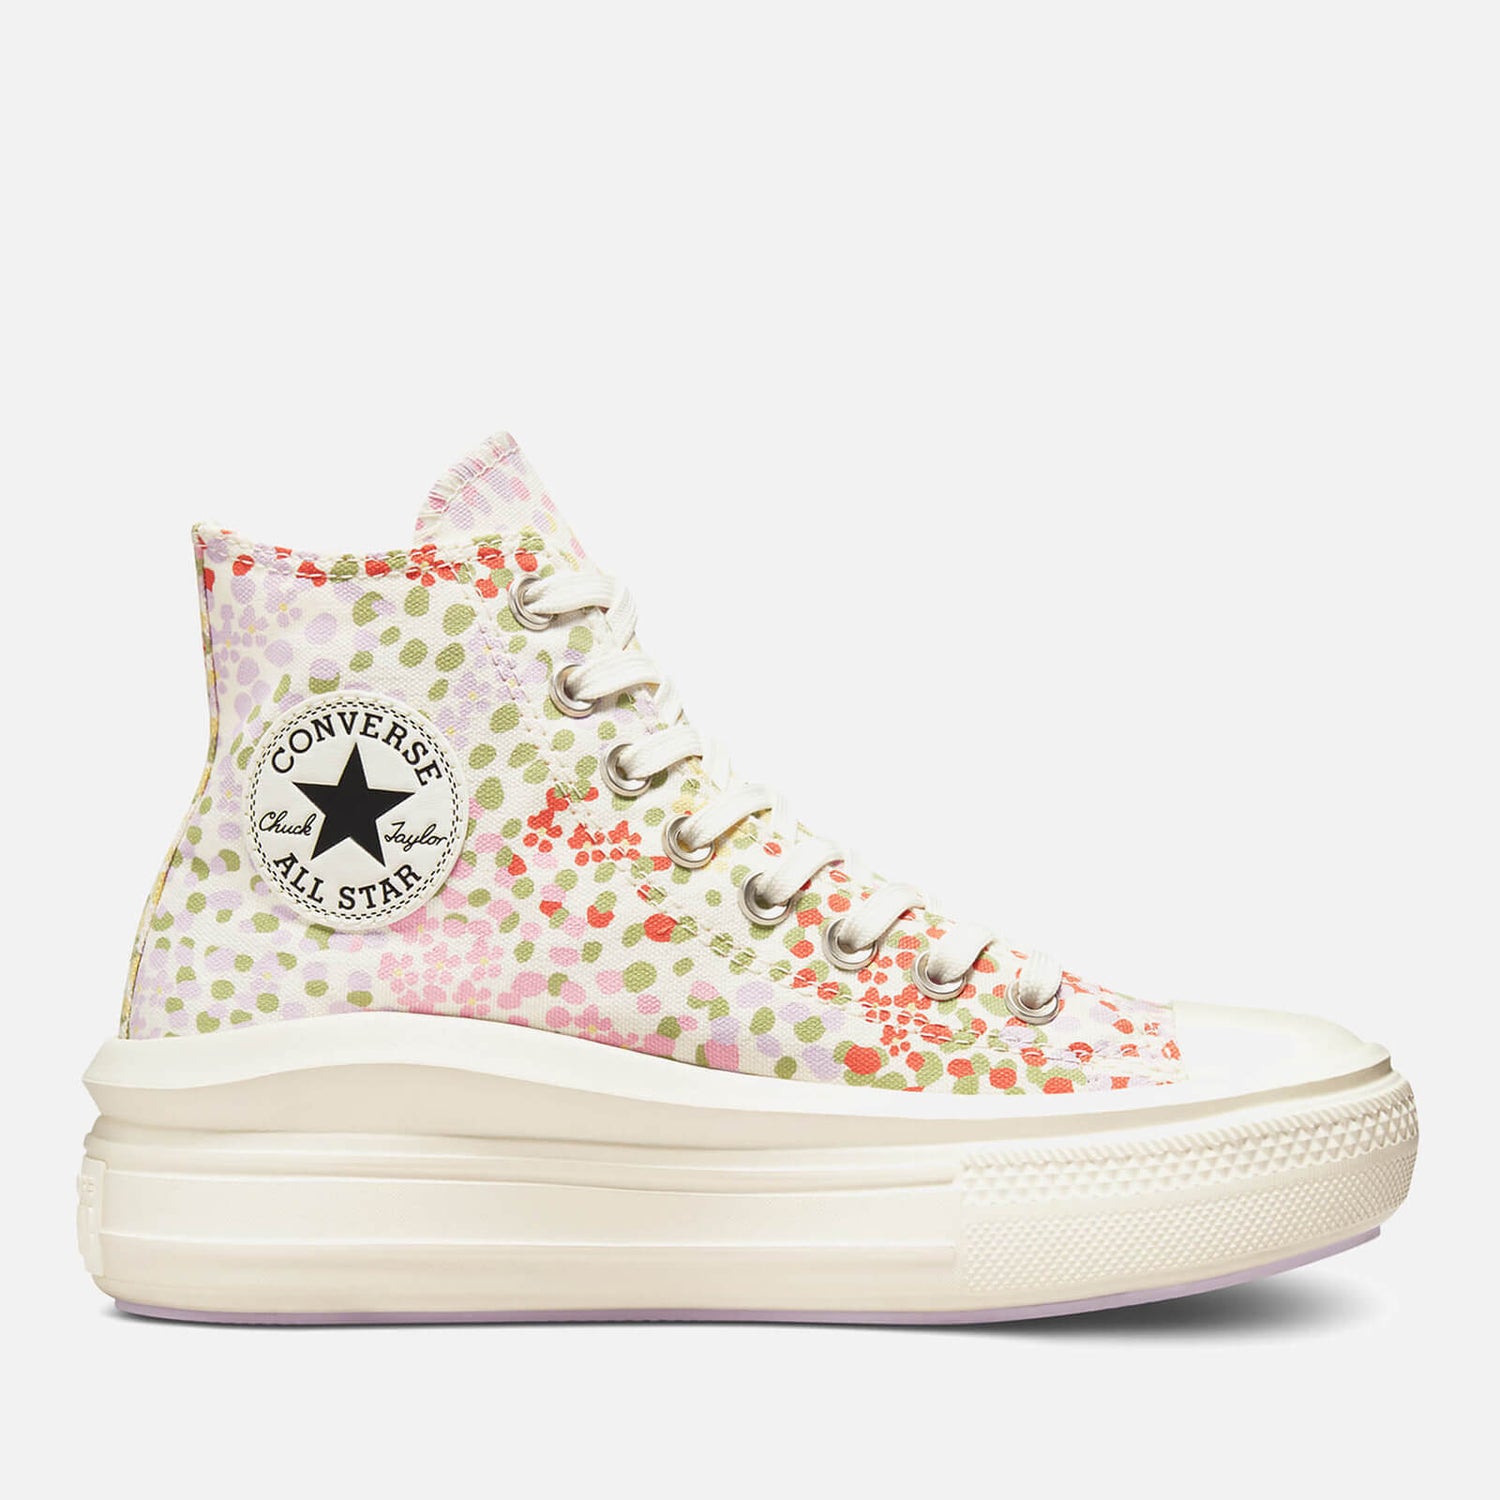 Converse Women's Chuck Taylor All Star Things To Grow Move Hi-Top Trainers - Egret/Multi/Black - UK 3